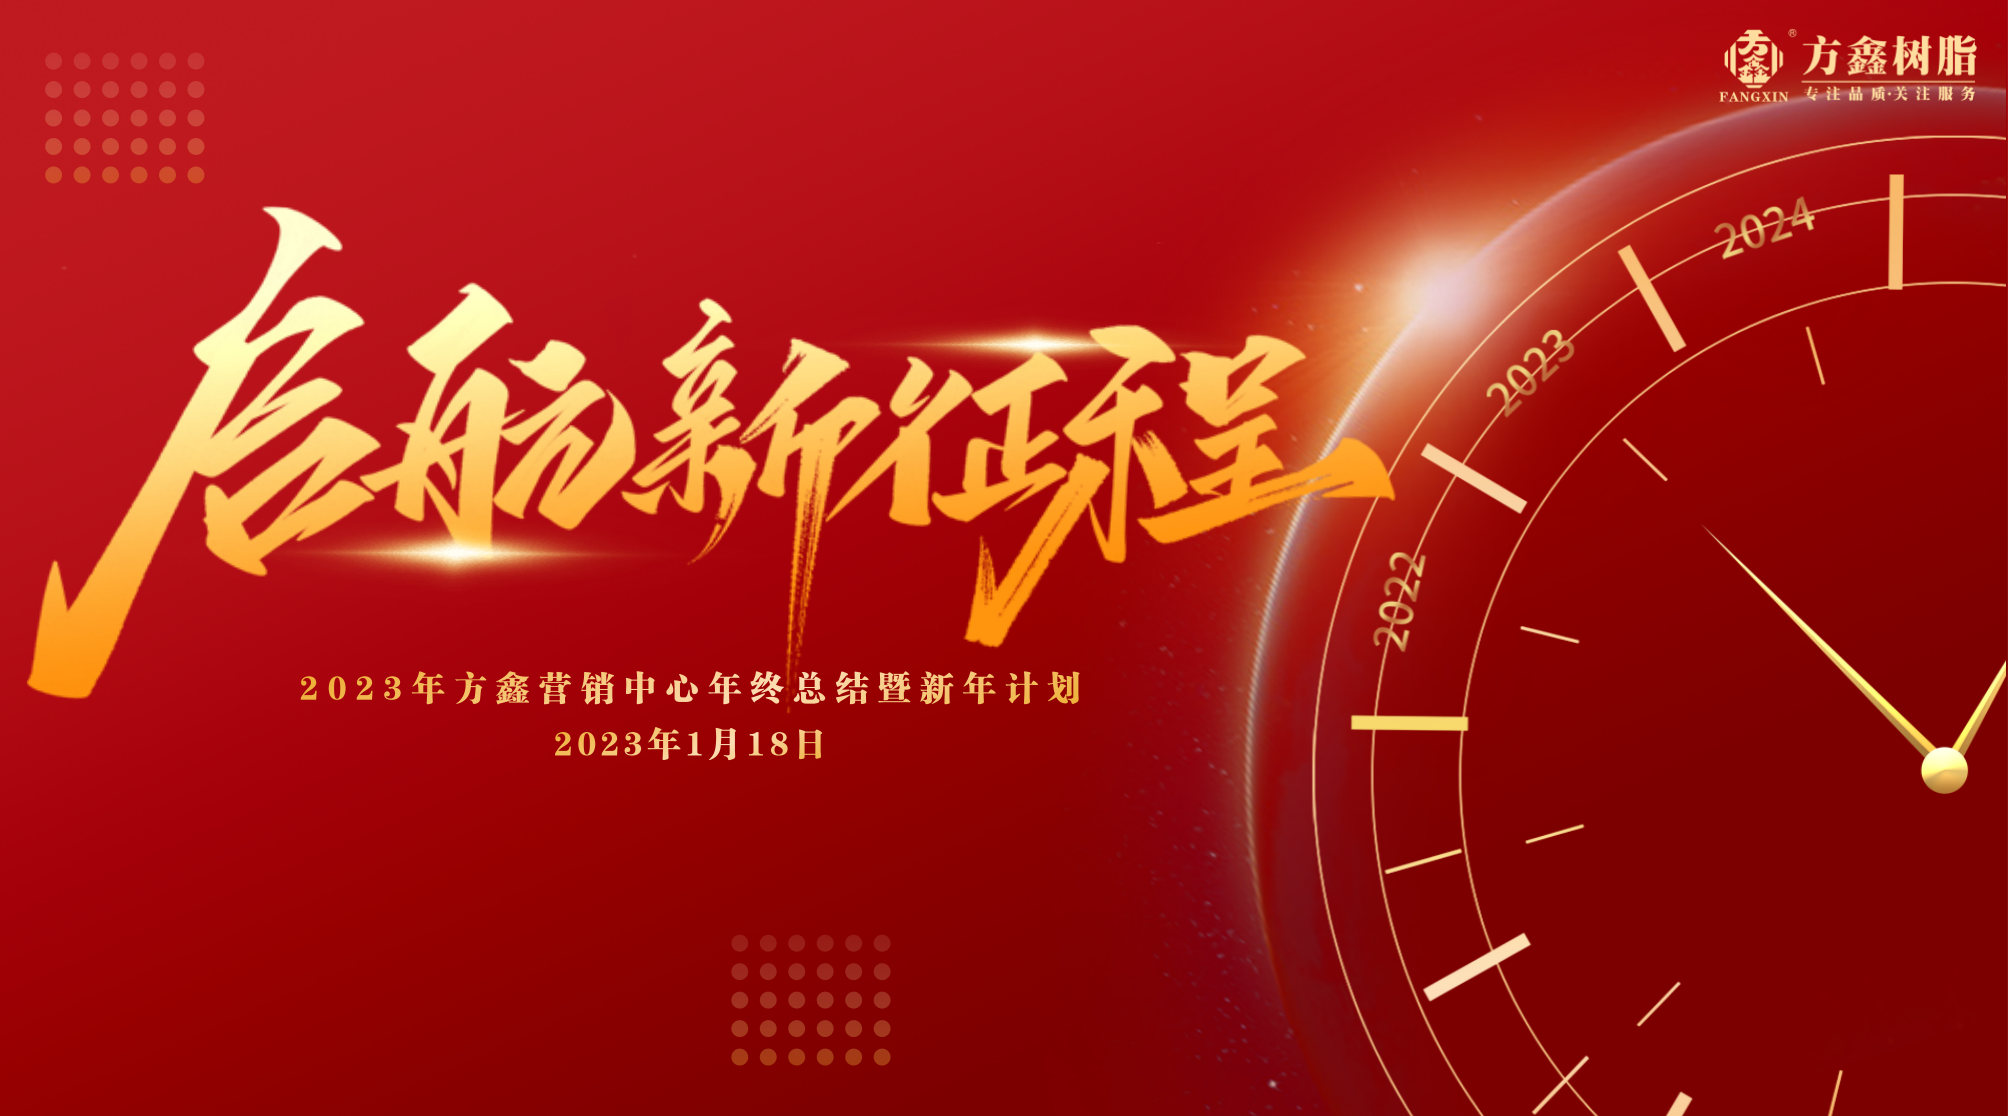 Setting Sail on A New Journey: Fangxin Marketing Center’s Year-end Summary and New Year’s plan for 2023